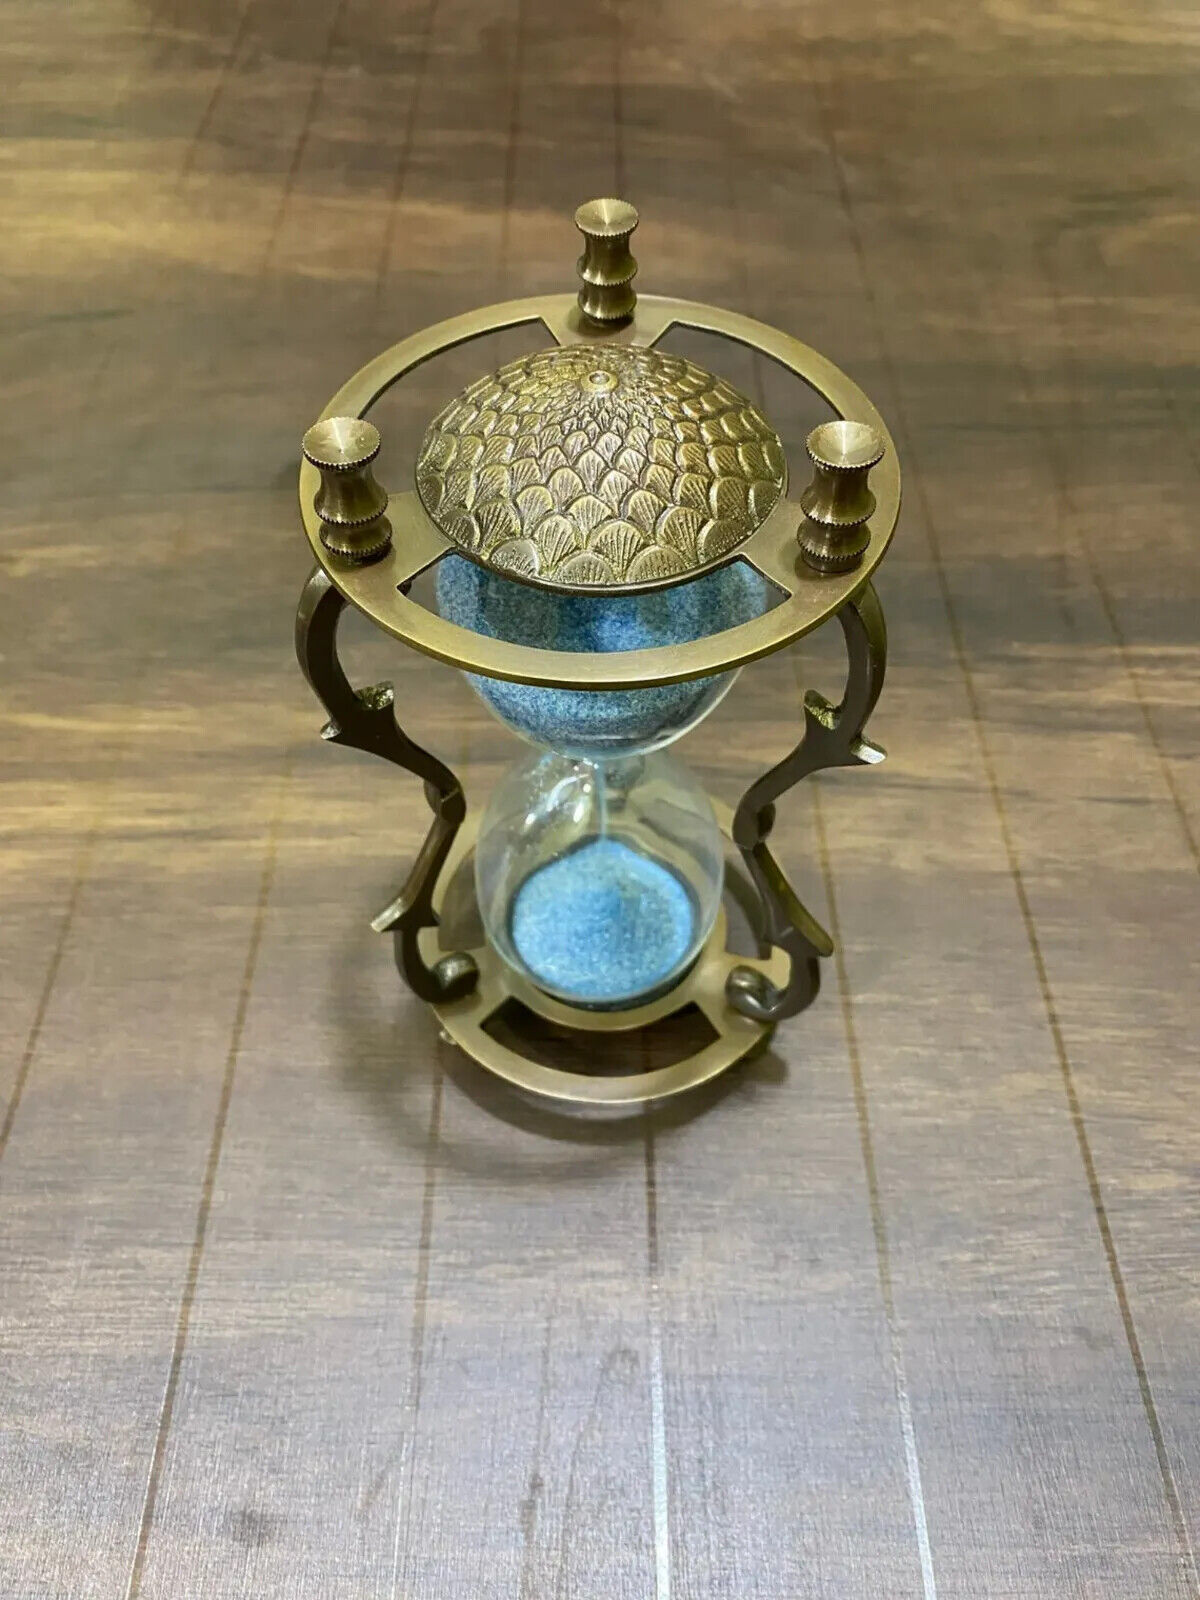 Brass Engraved Hourglass, Classic Nautical Sand Timer, Table Top Décor